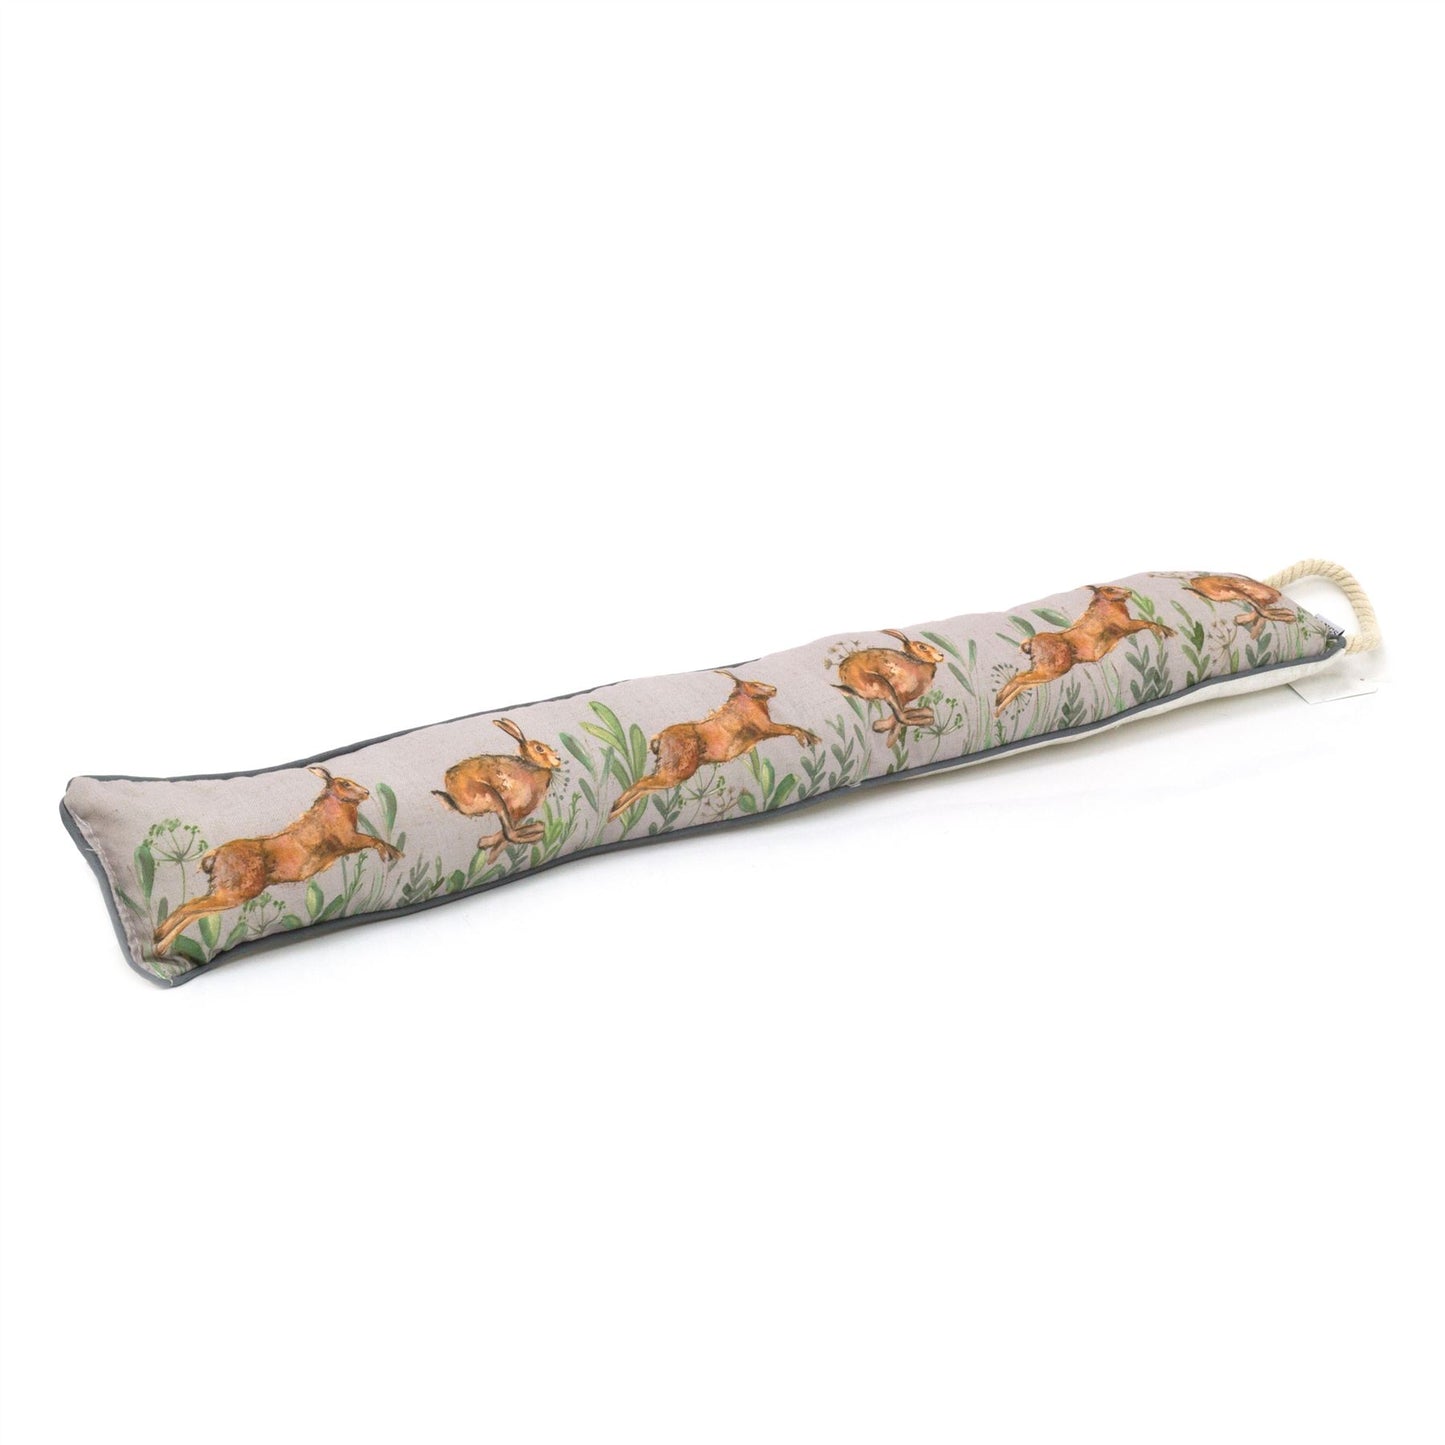 94cm Hare Fabric Door Draught Excluder | Winter Draft Excluder Door Cushion | Draft Insulator Door Draught Cushion